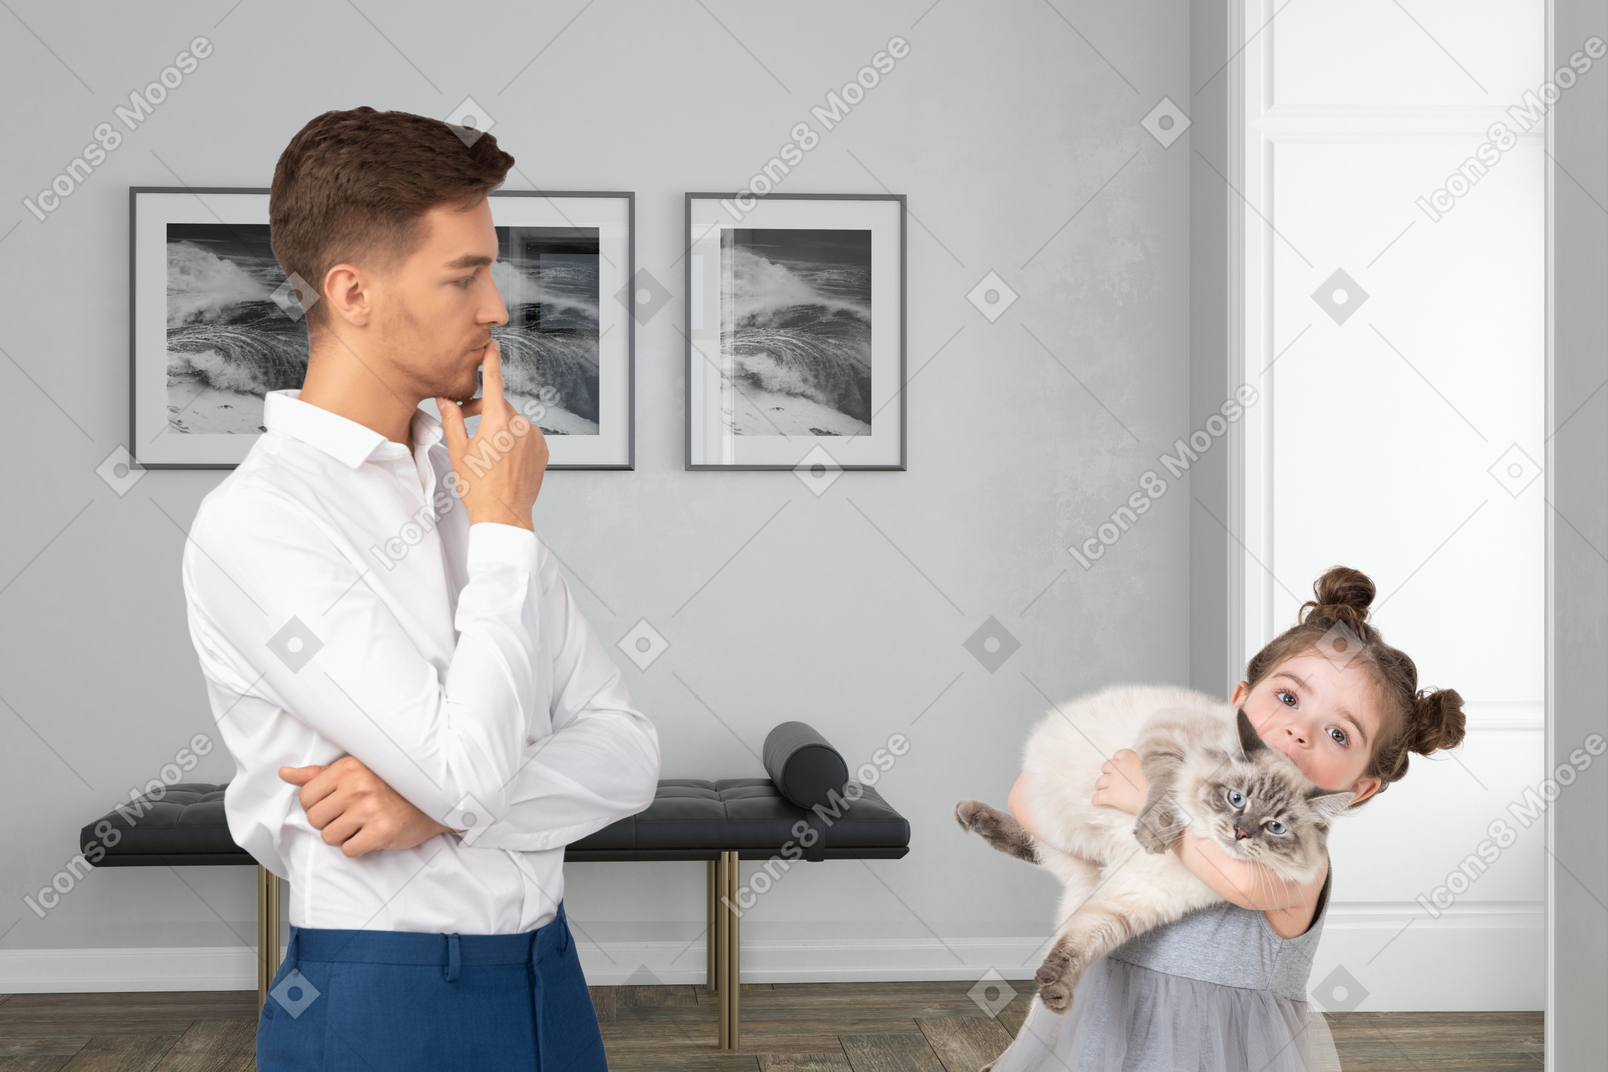 A man and a little girl holding a cat